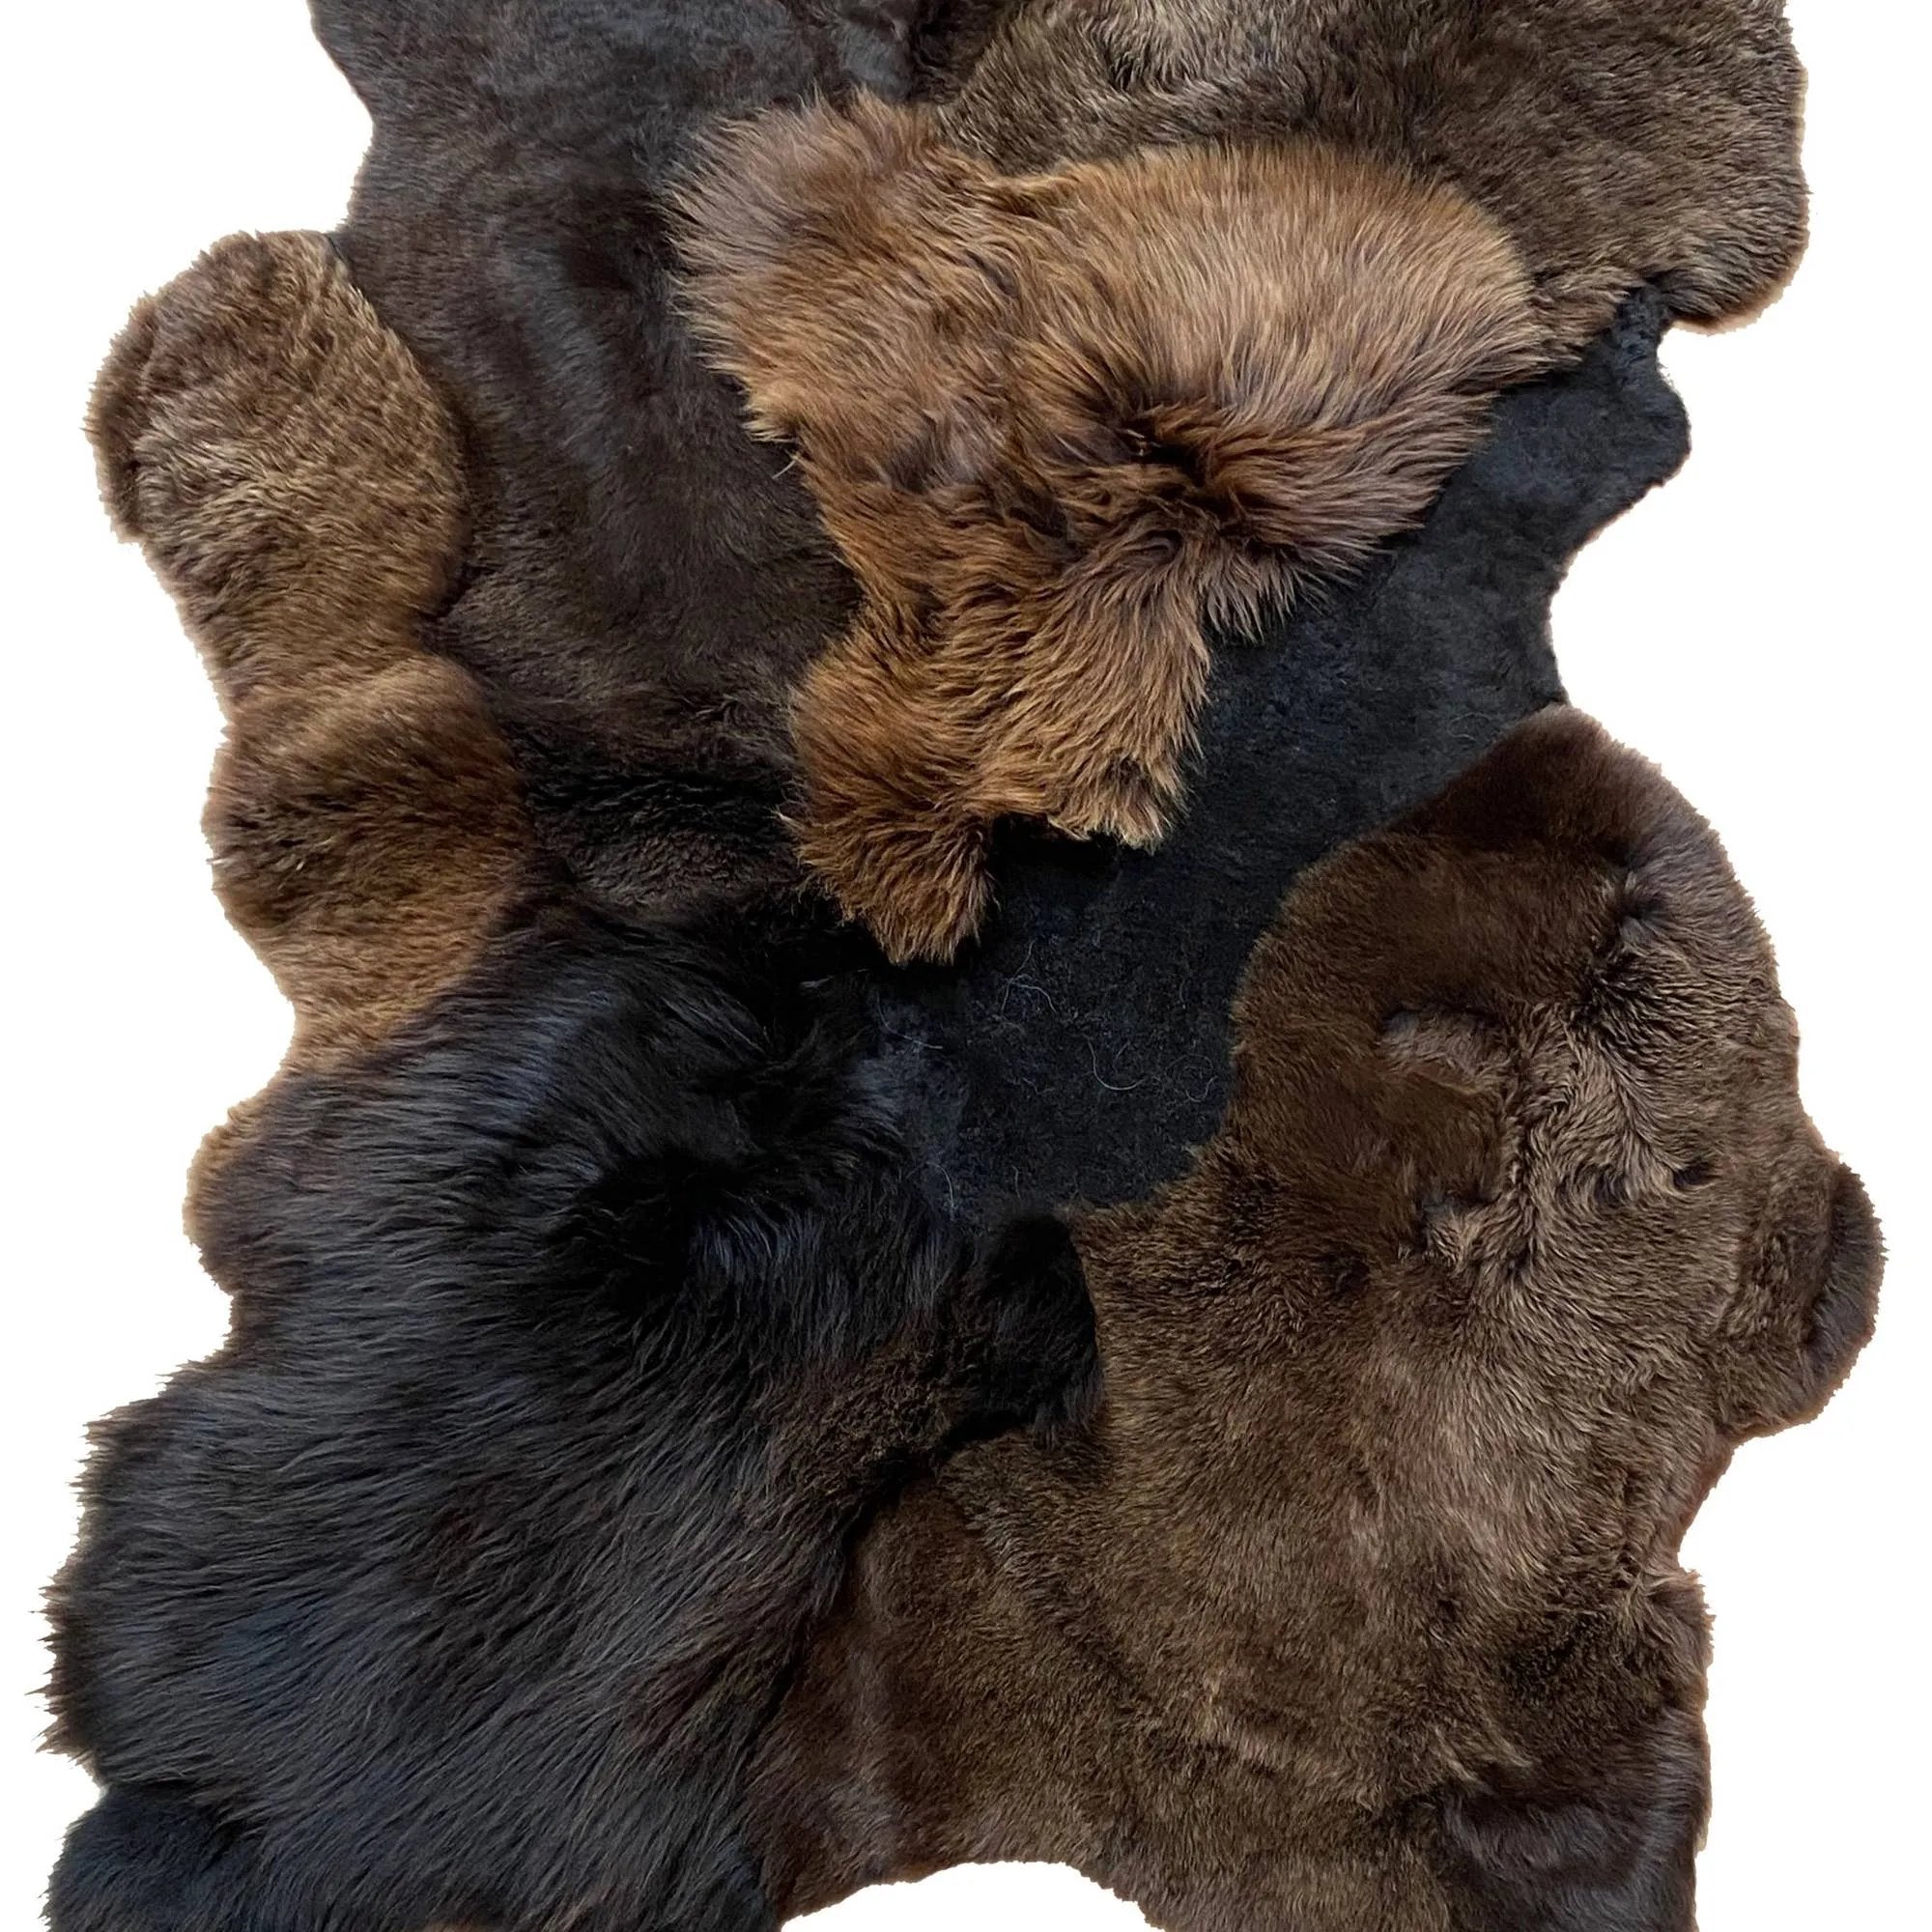 Sheepskins are used for benches, chairs, floor, and sofa decoration, adding warm texture to room design. Dyreskinn® sheepskins come from sheep from Iceland, the Netherlands, Germany, the United Kingdom and Scandinavia. They offer a beautiful and unique accent to your home interior and exterior decoration. Amethyst Home provides interior design, new home construction design consulting, vintage area rugs, and lighting in the Portland metro area.